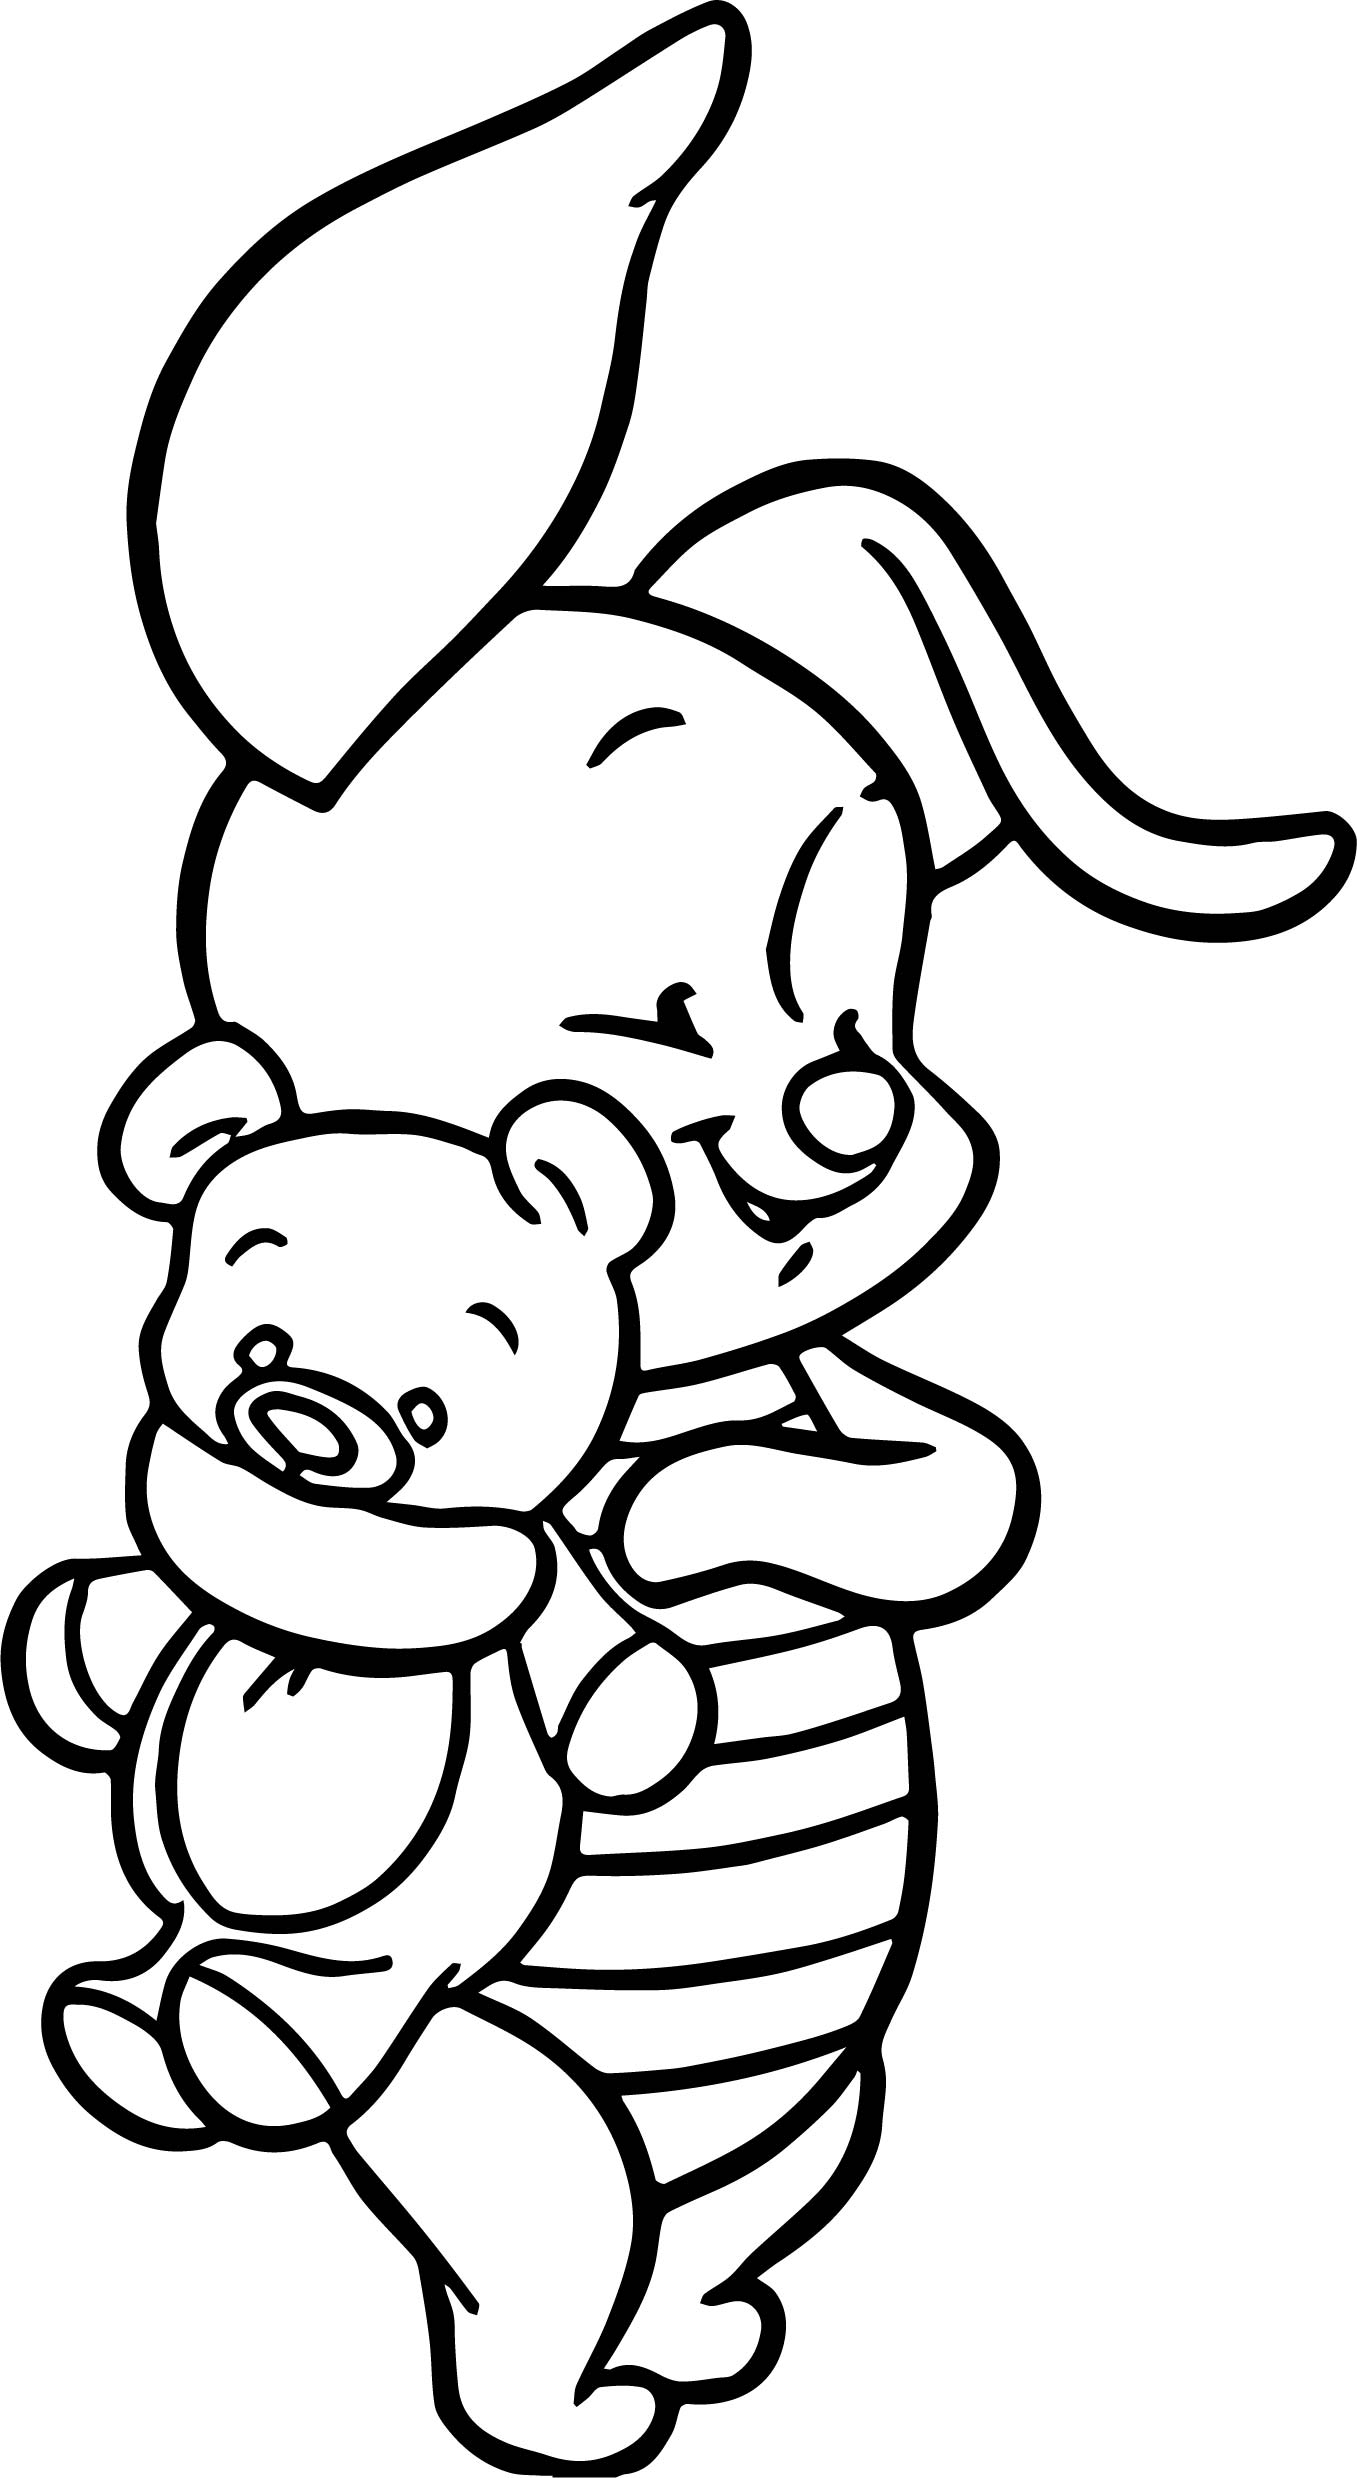 Winnie The Pooh Coloring Pages Online Ba Winnie The Pooh Coloring Pages At Getdrawings Free For